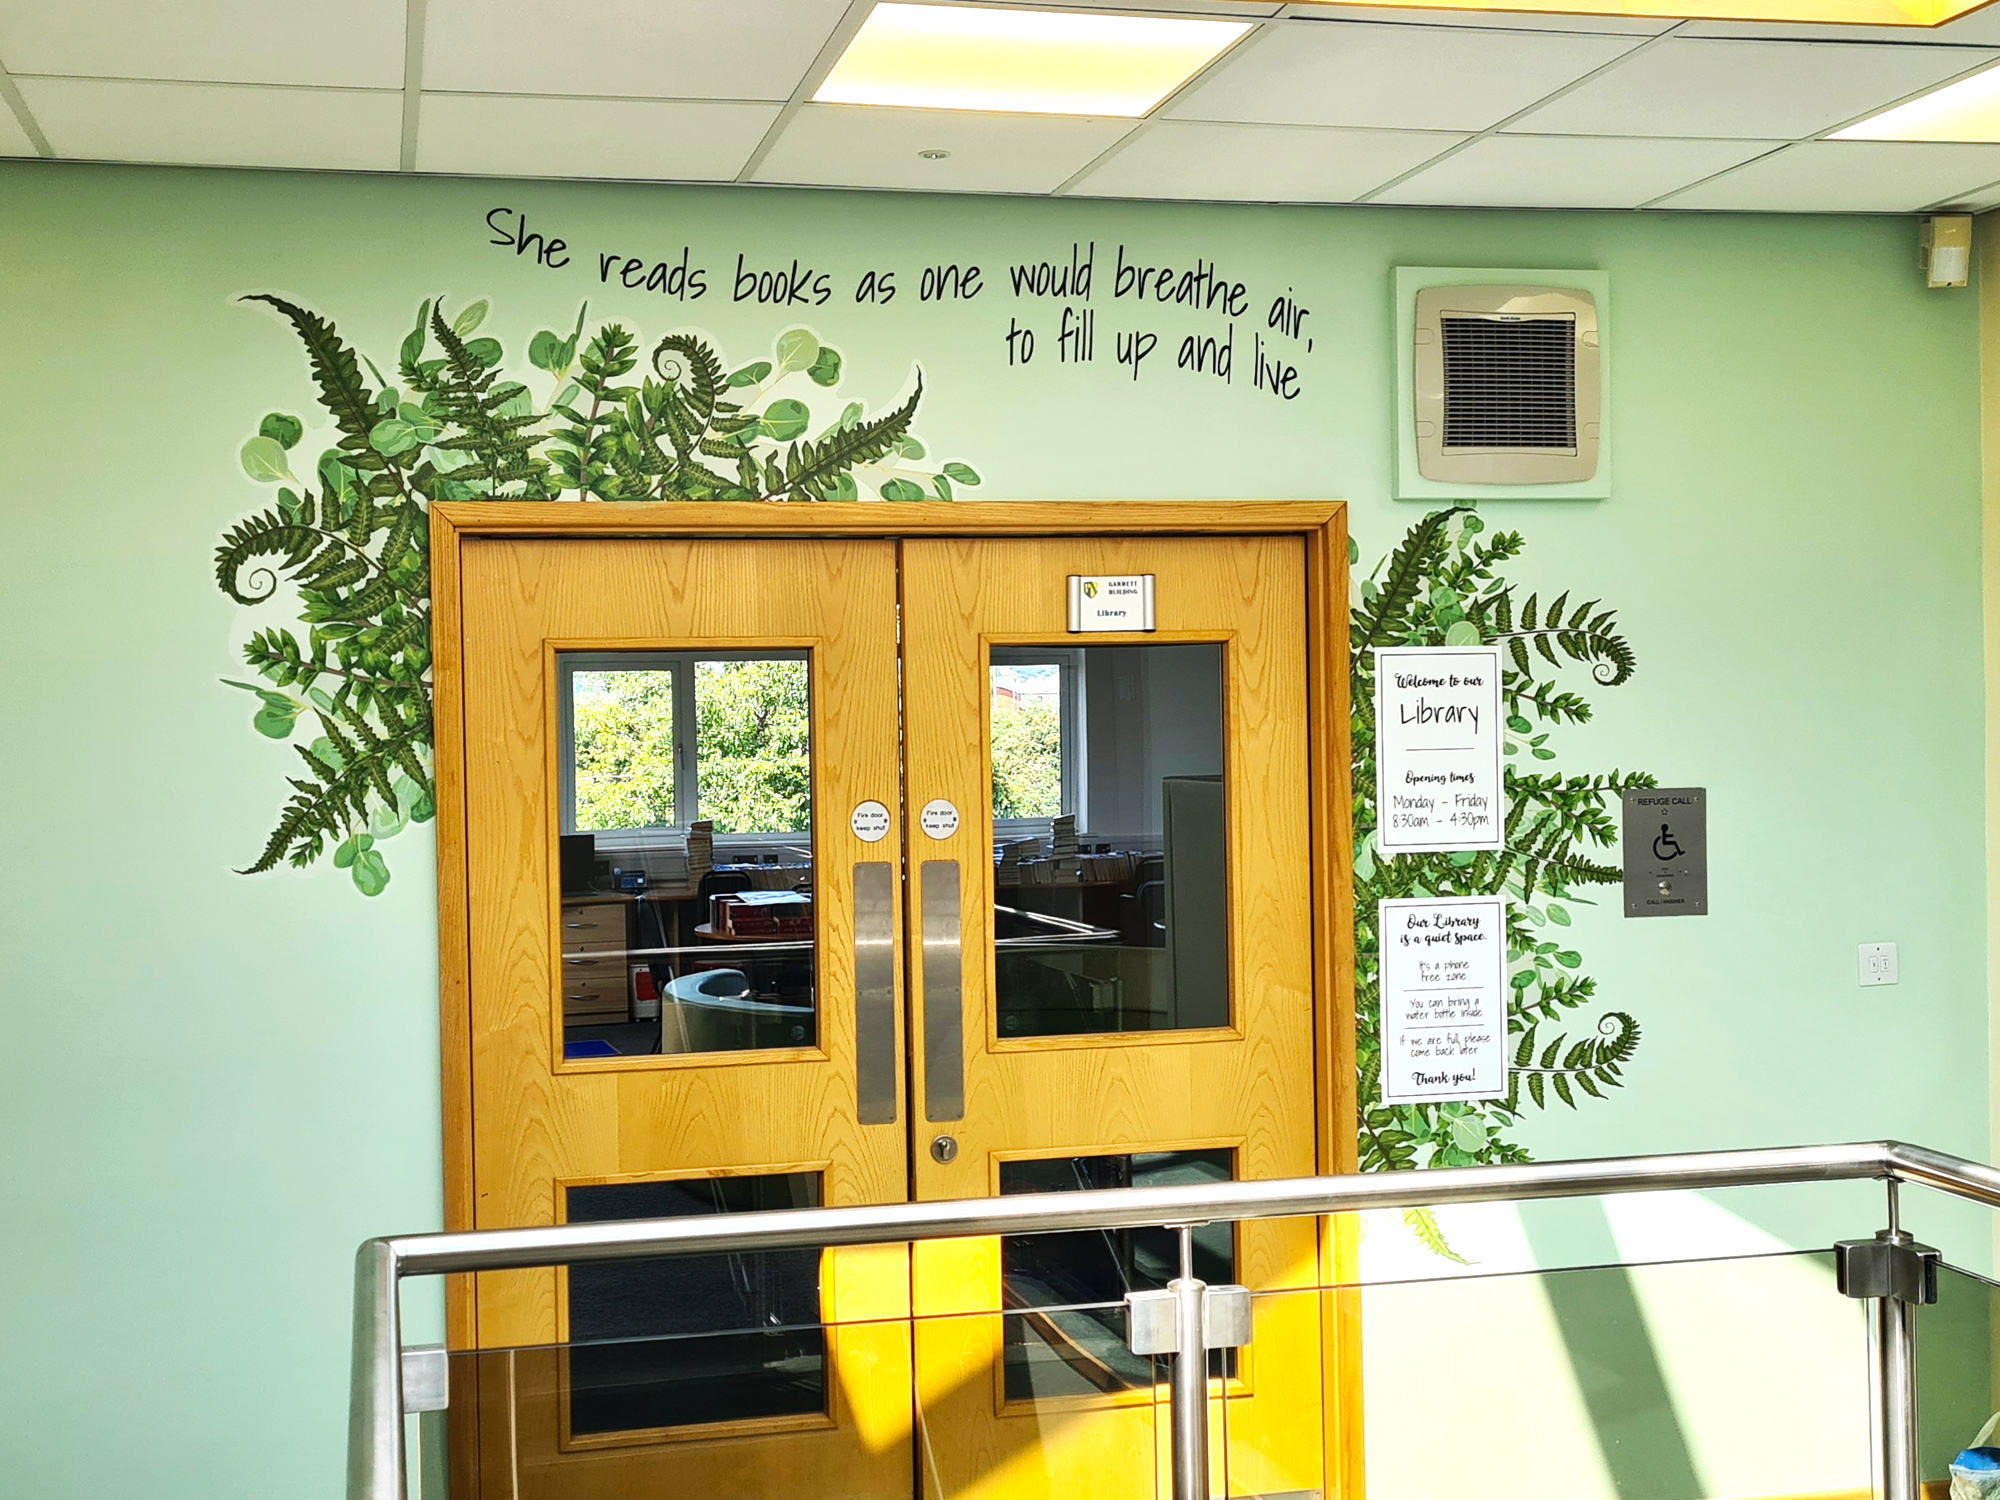 Mural of fern is shown on pale green background around the top edge of library entrance door with wording above the fern which reads "She reads books as one would breathe or, to fill up and live"